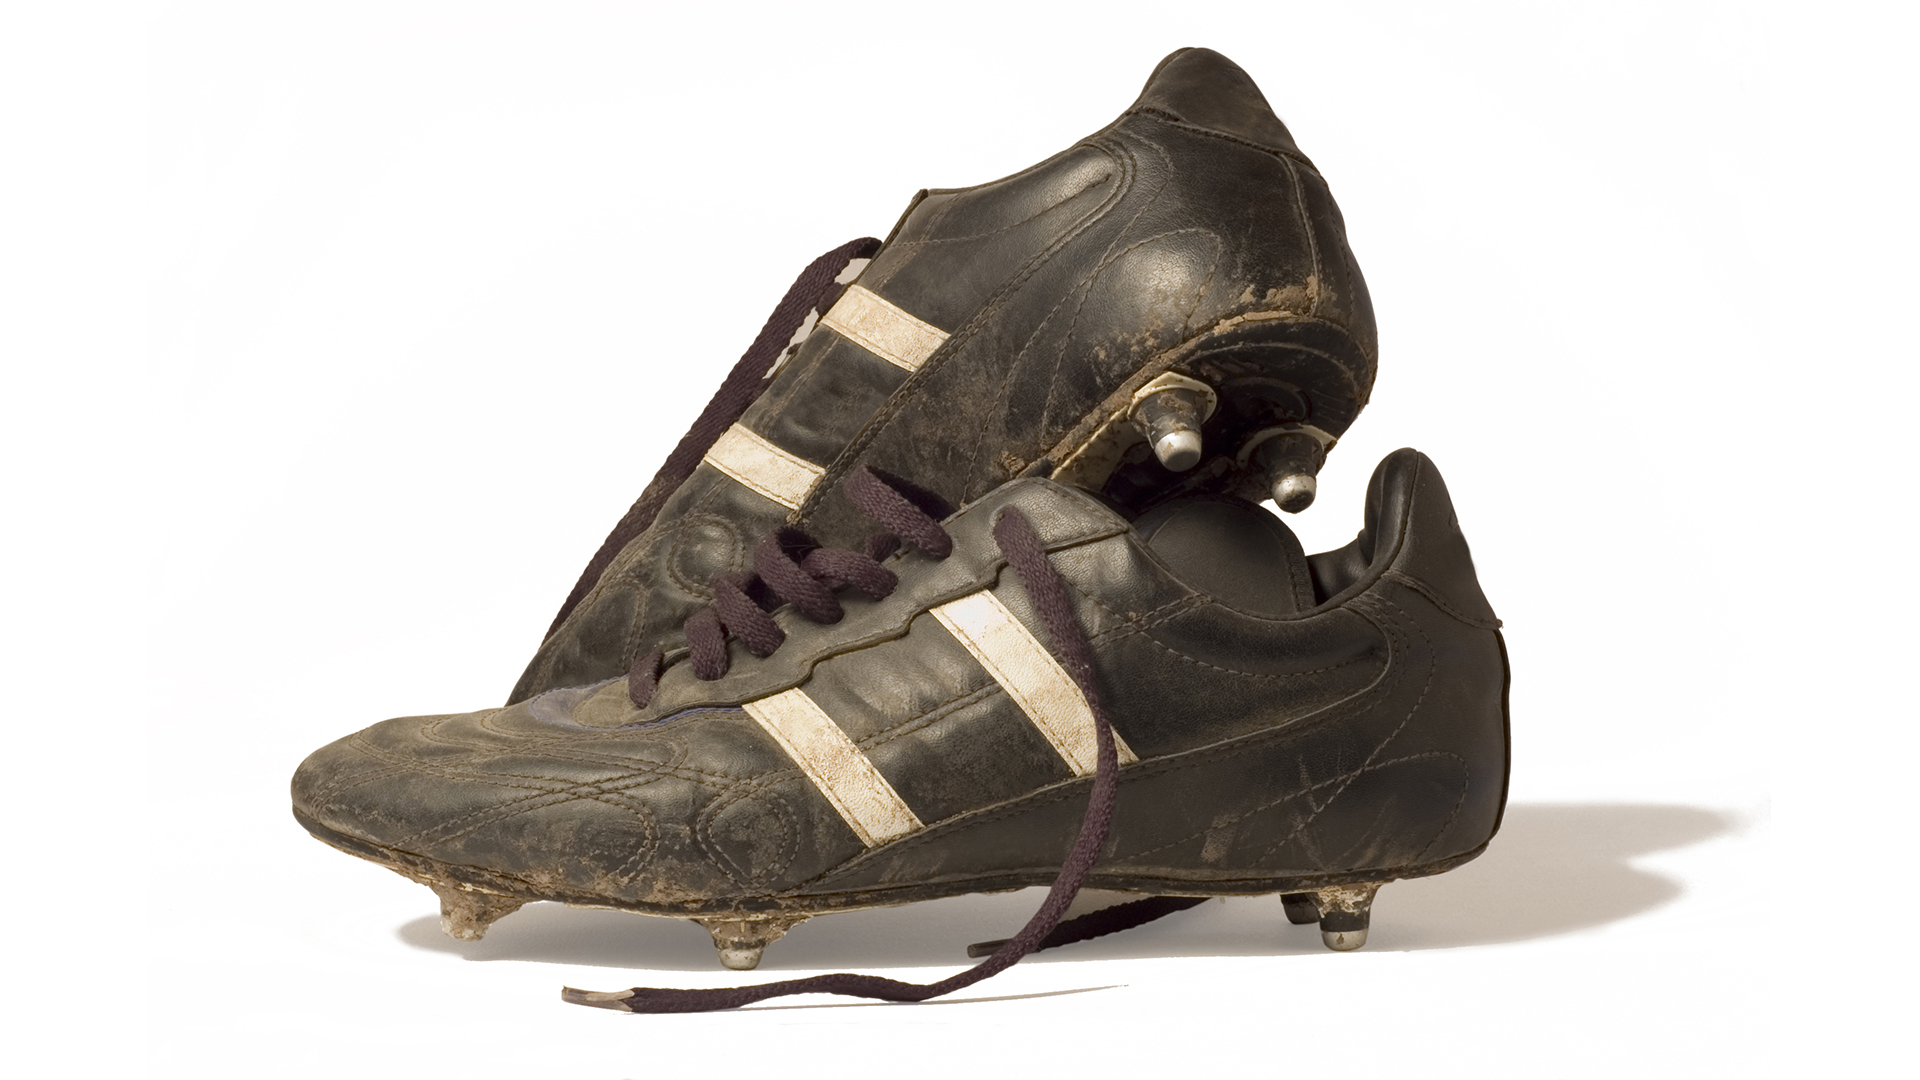 A pair of muddy football boots